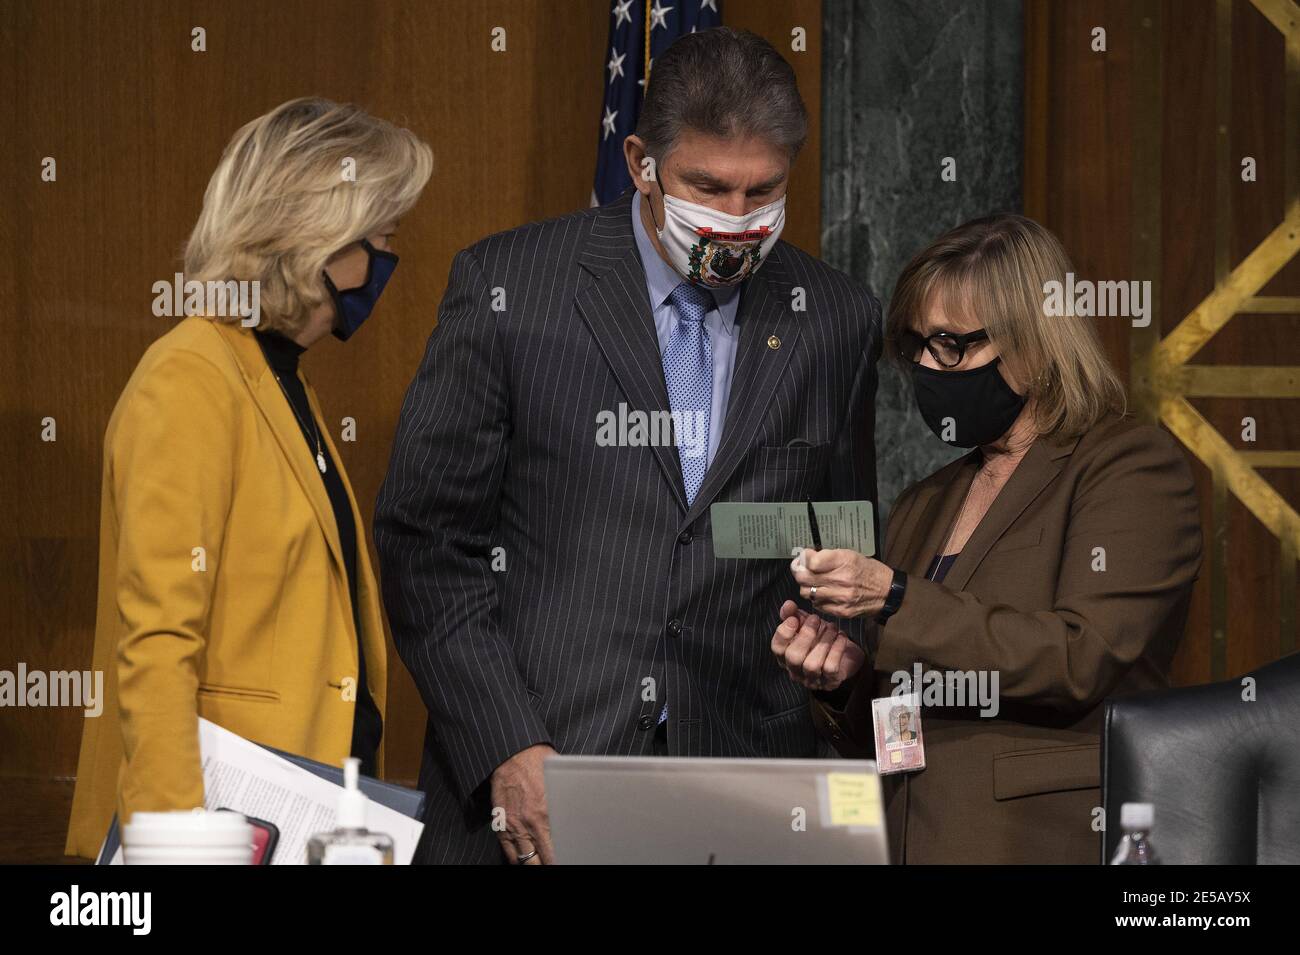 Washington, United States. 27th Jan, 2021. Chairwoman Lisa Murkowski (L), R-Alaksa, and Ranking Member Joe Manchin, D-WV, go over a seating chart as control of the committee had not been finalized ahead of a hearing to examine the nomination of Former Michigan Governor Jennifer Granholm to be Secretary of Energy, on Capitol Hill in Washington, DC, on January 27, 2021. Photo by Jim Watson/UPI Credit: UPI/Alamy Live News Stock Photo